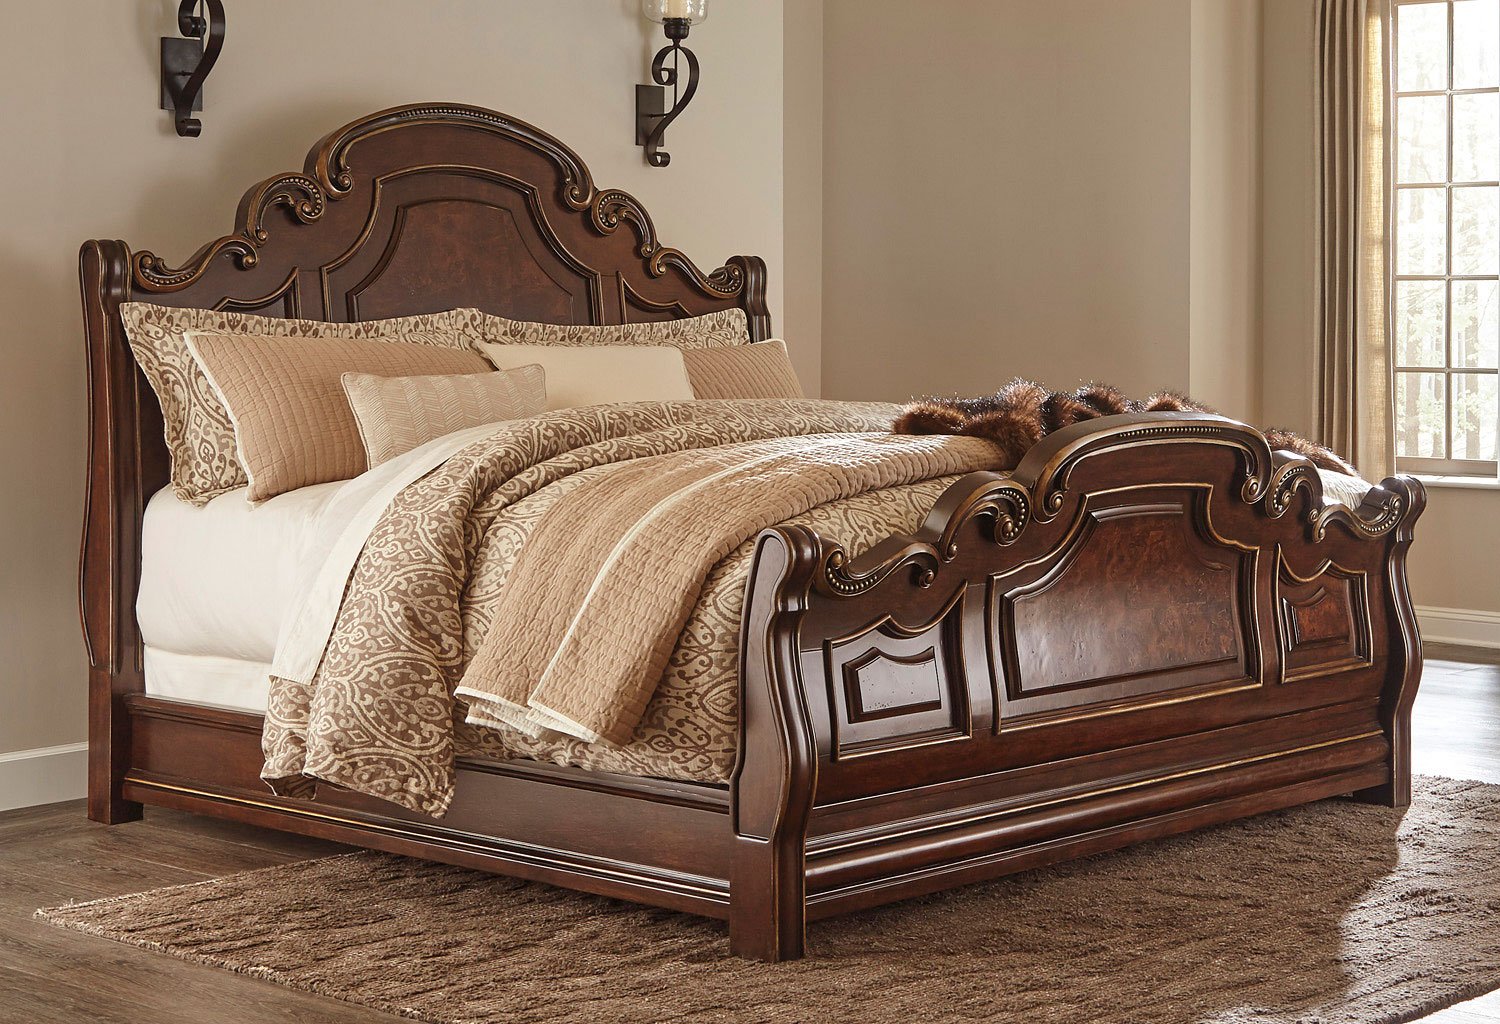 Florentown Sleigh Bed by Signature Design by Ashley ...